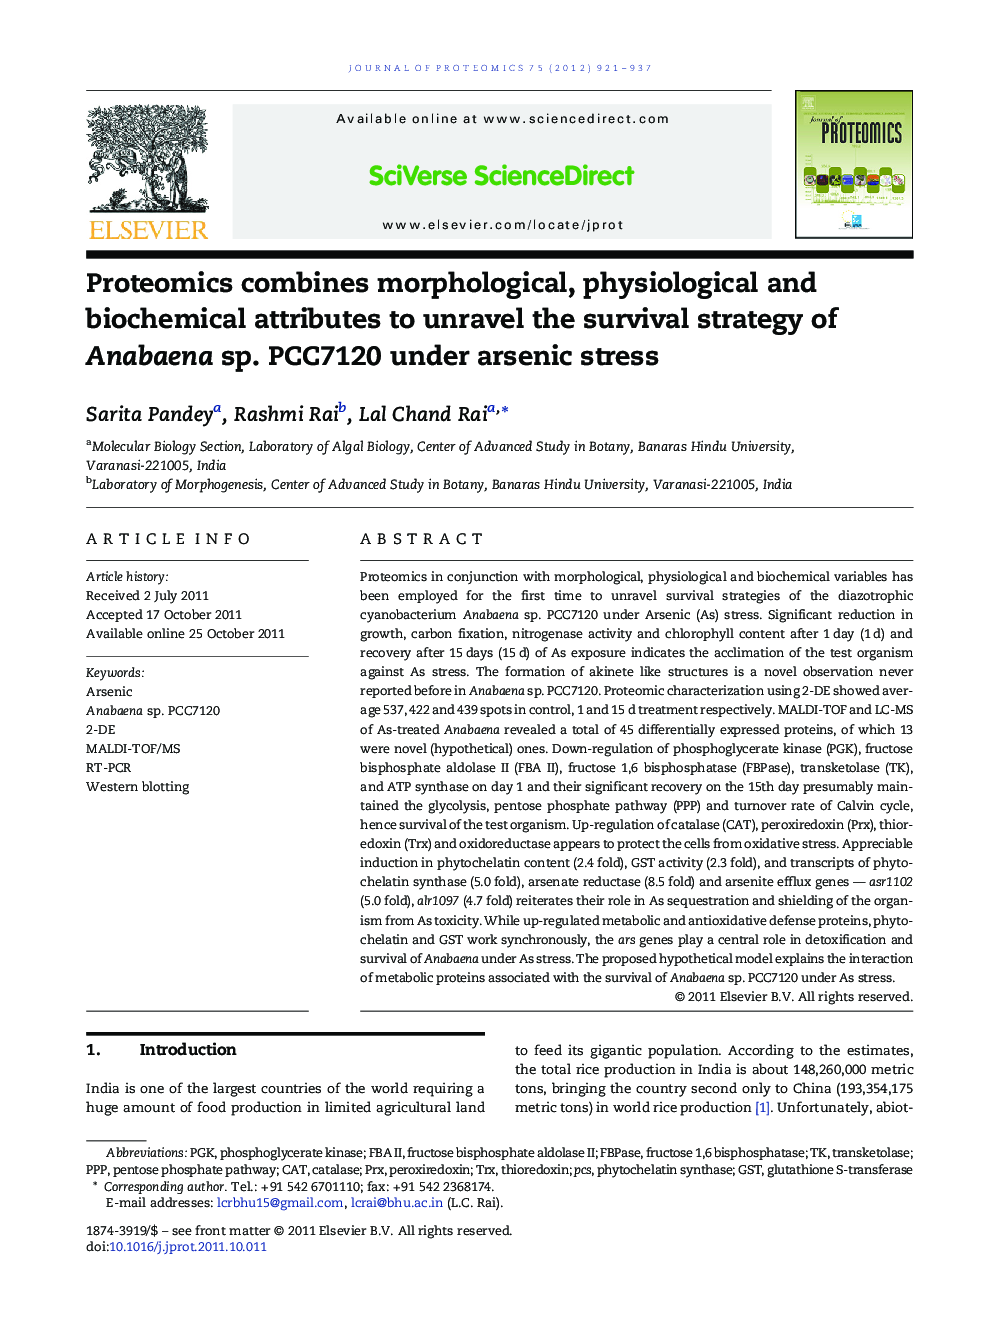 Proteomics combines morphological, physiological and biochemical attributes to unravel the survival strategy of Anabaena sp. PCC7120 under arsenic stress